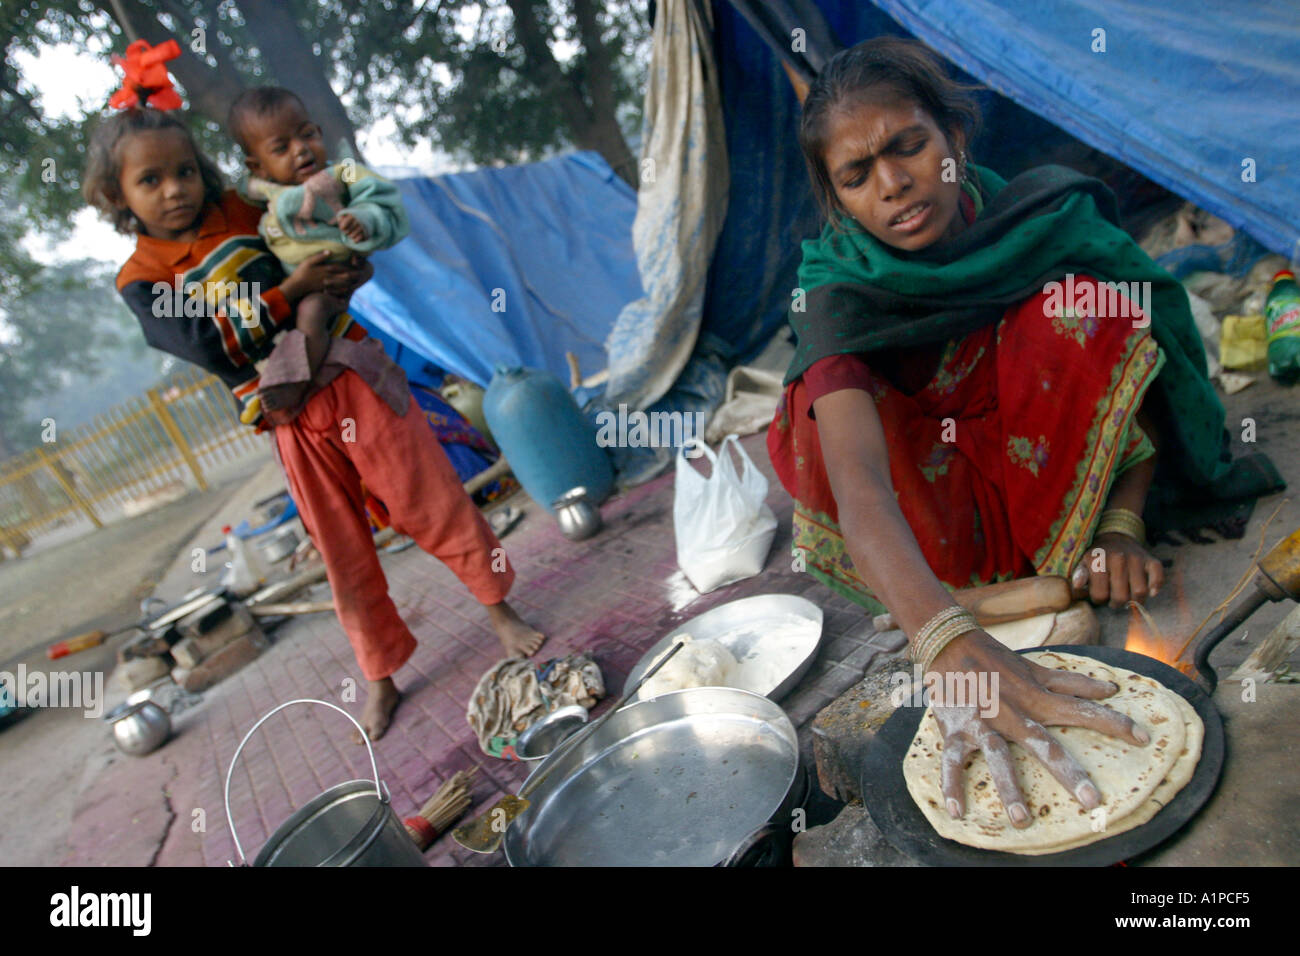 A women cooks food outside a tent in a slum dwelling in New Delhi in India Stock Photo